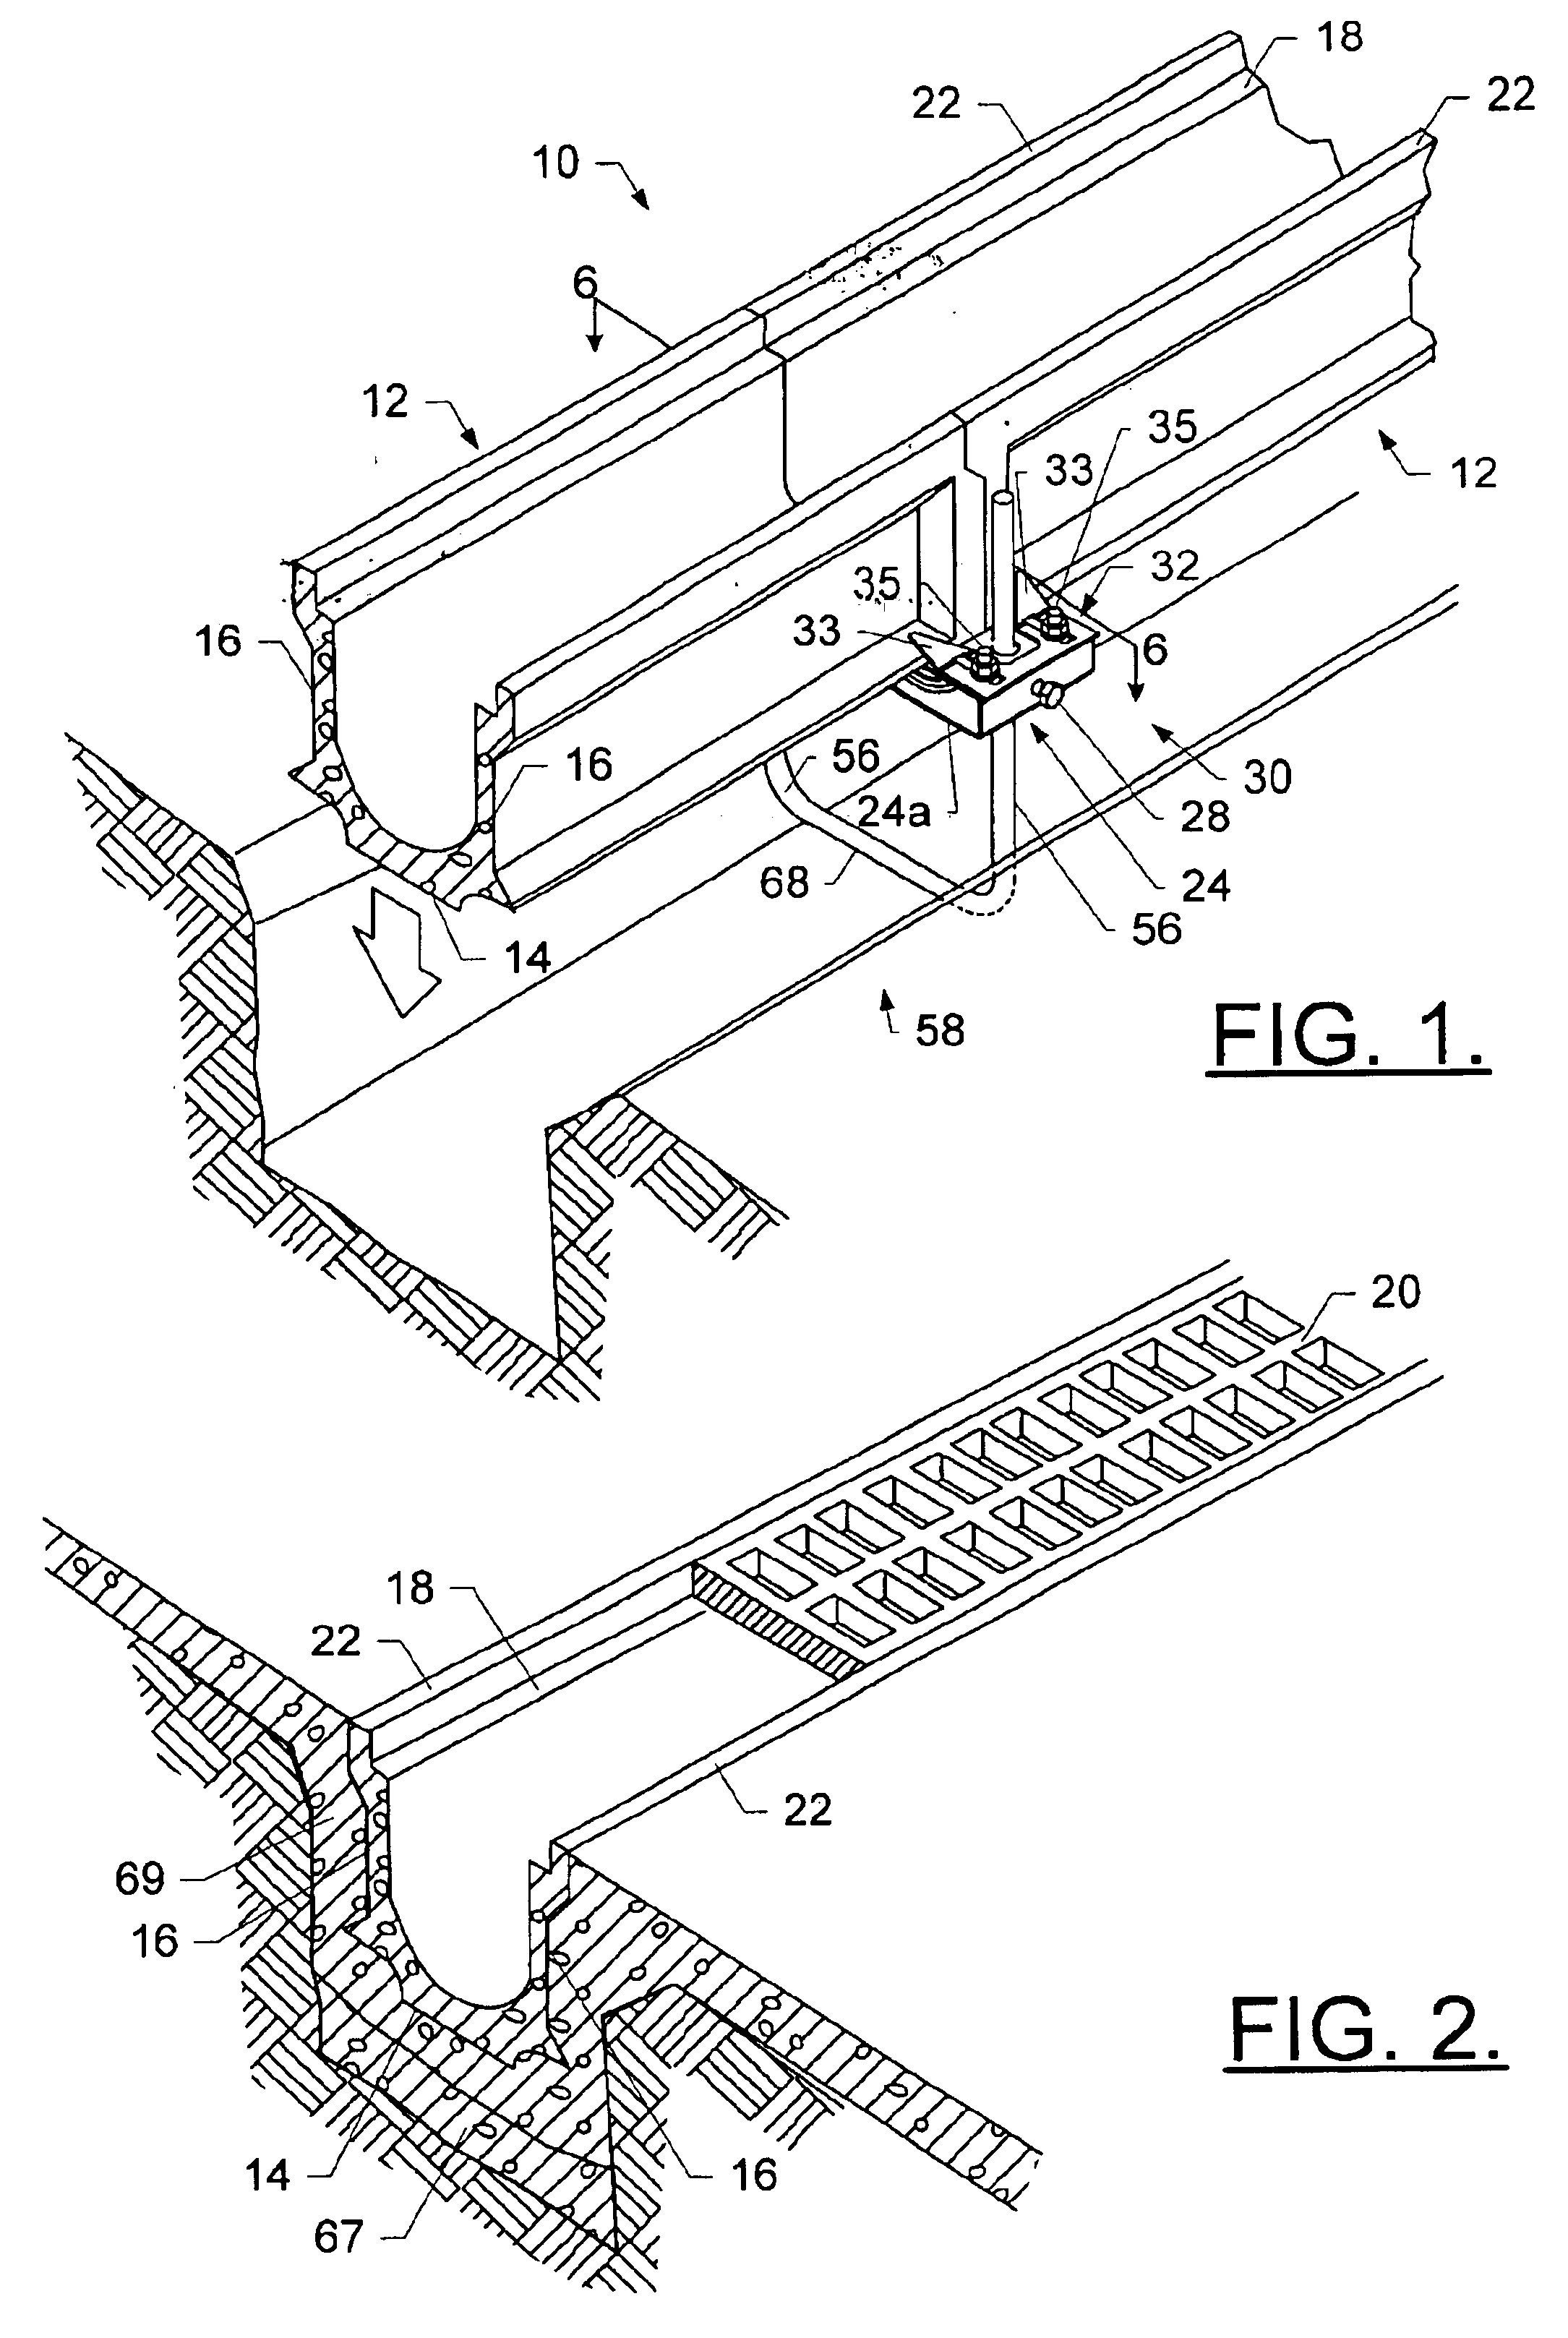 Method and apparatus for aligning channel sections with an adjustable alignment key